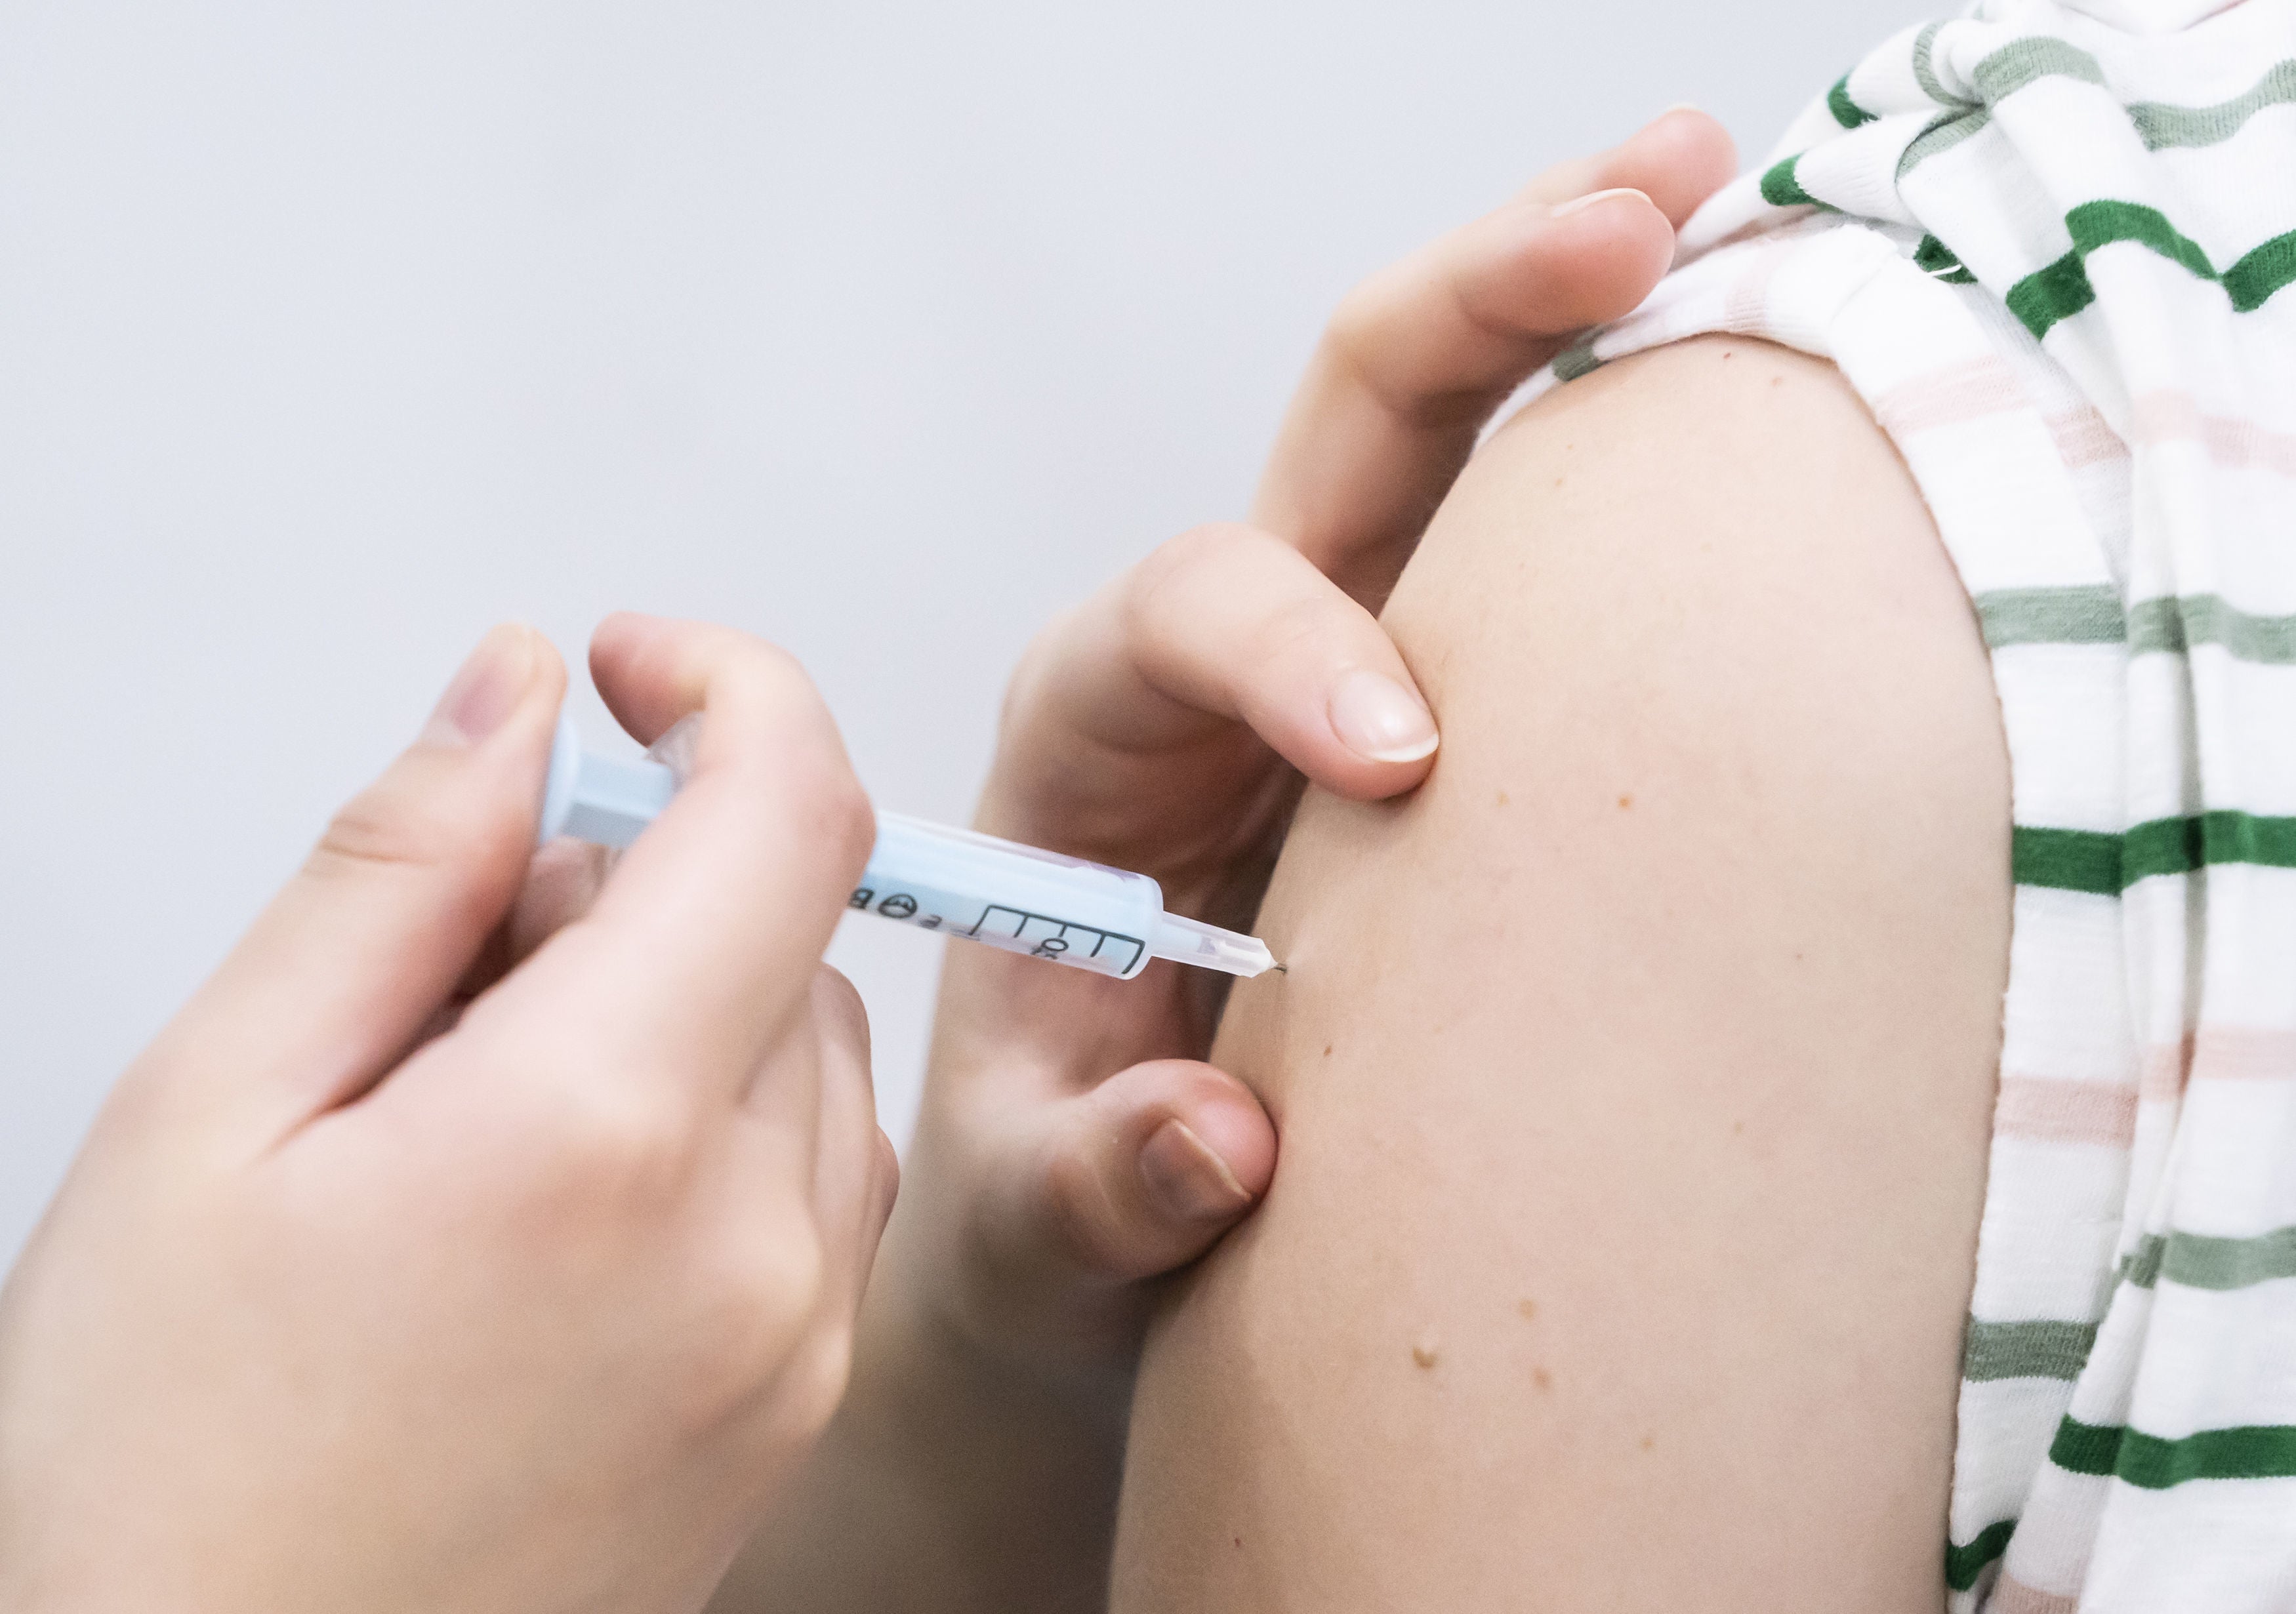 The NHS says delivering both flu and Covid vaccines together will maximise protection for people